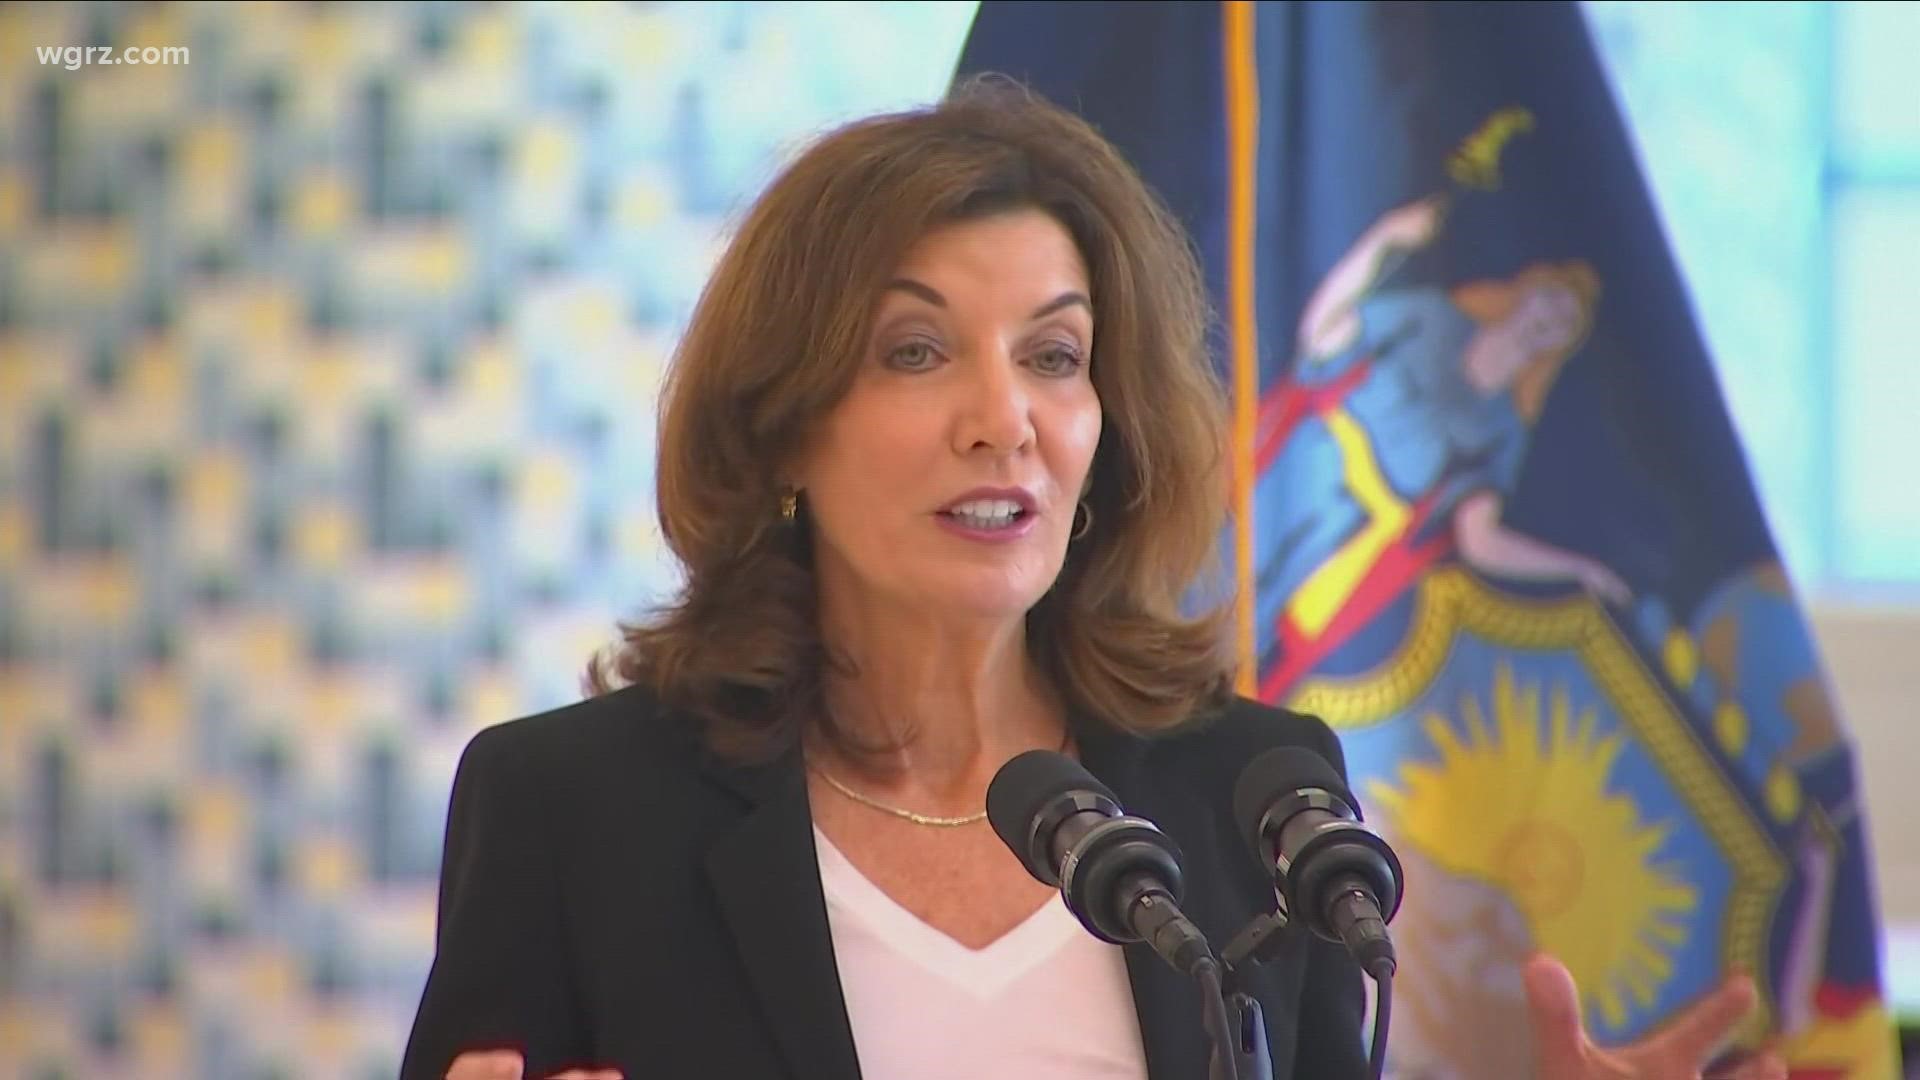 A complicated team building process for her upcoming administration as governor as well as an expensive upcoming campaign are on Hochul's docket.